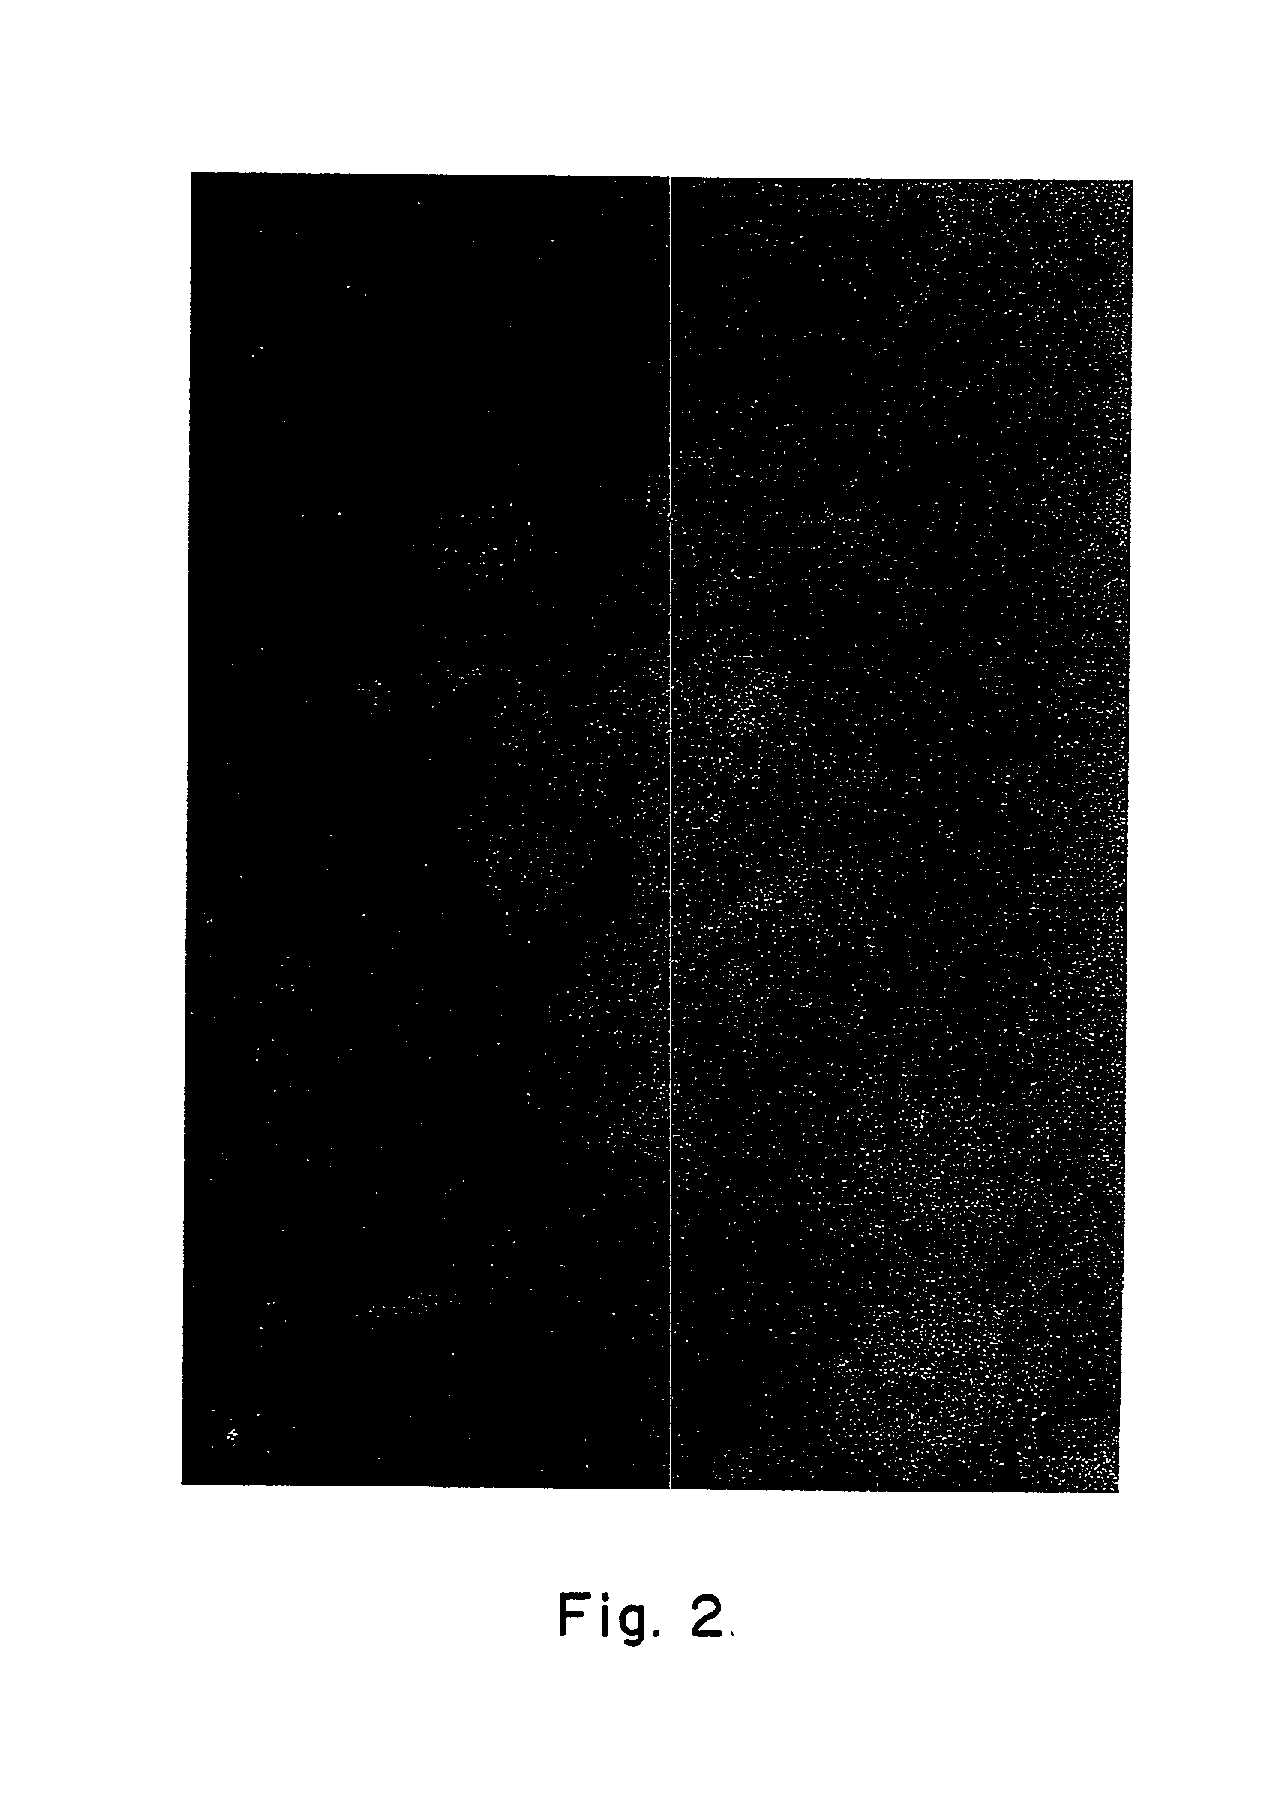 Natural non-polar fluorescent dye from a non-bioluminescent marine invertebrate, compositions containing the said dye and its uses